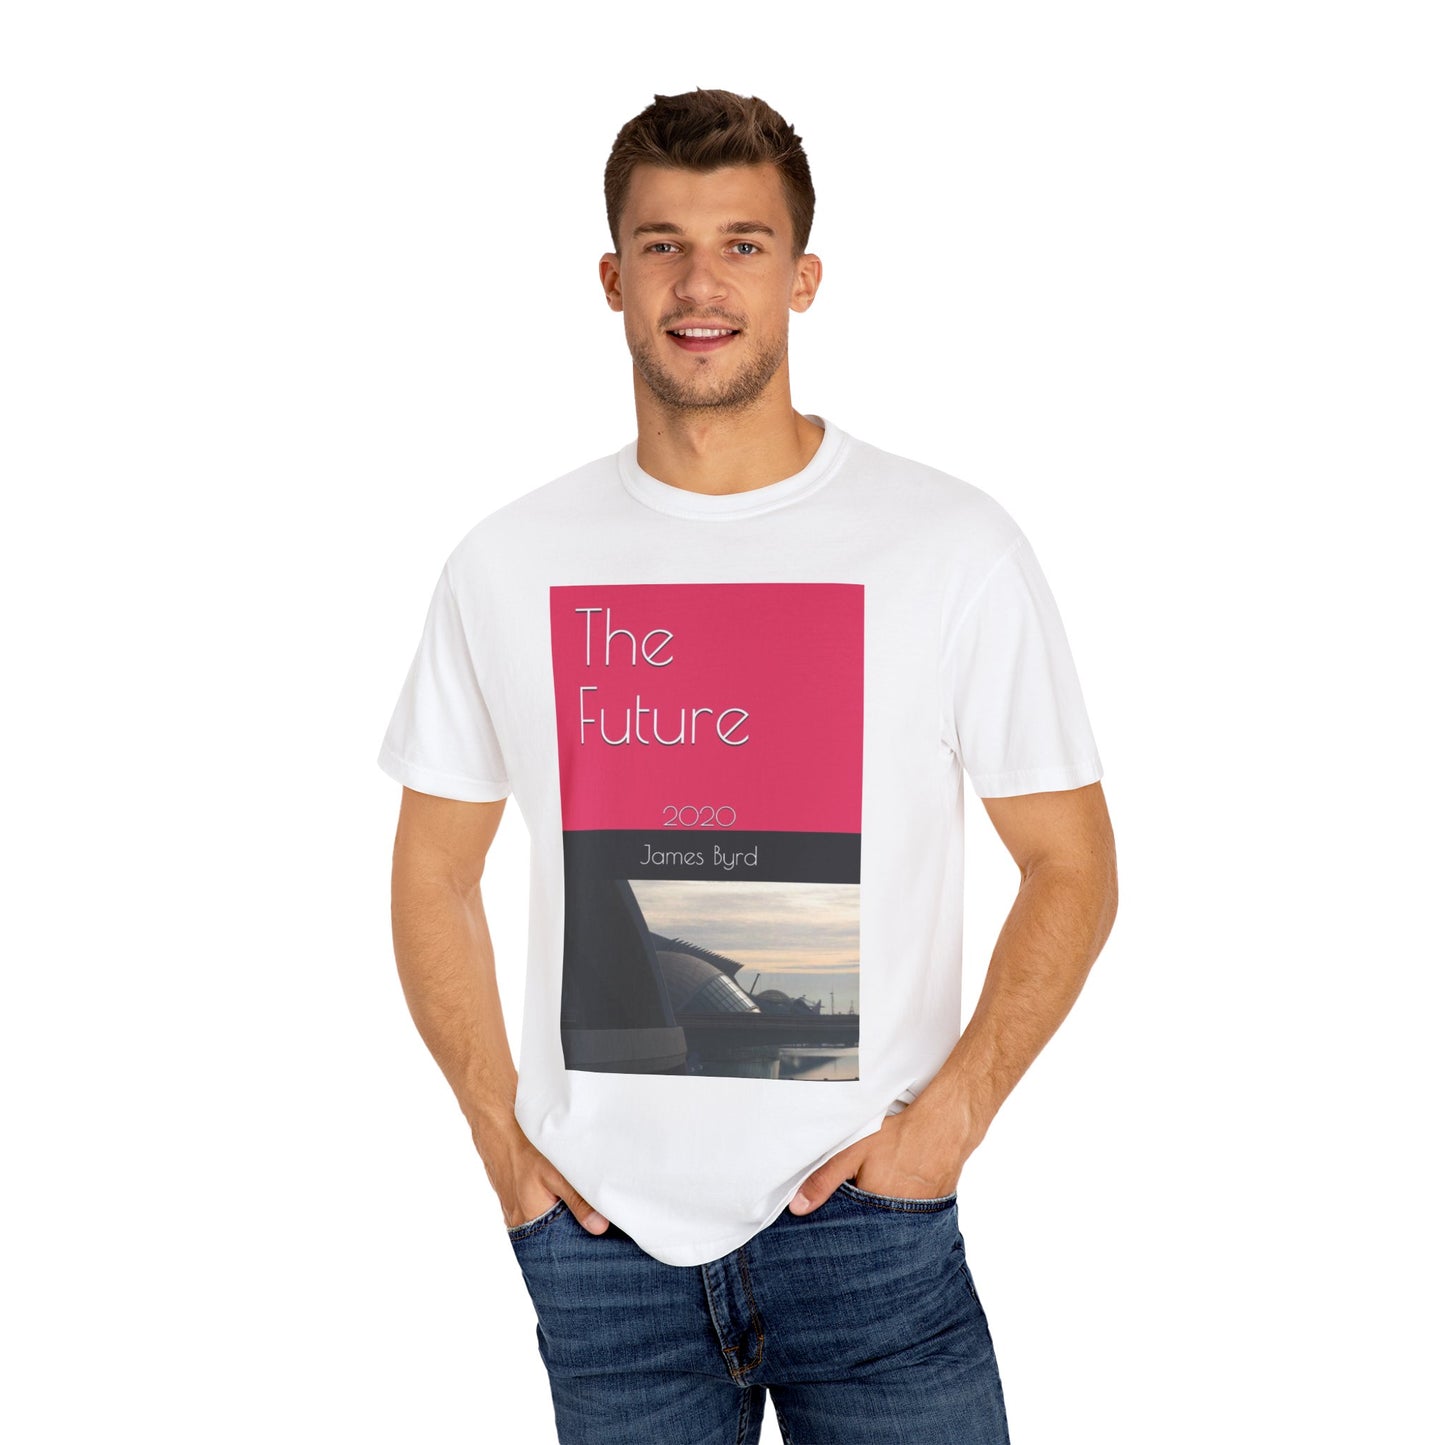 The Future:2020 | by James Byrd T-shirt